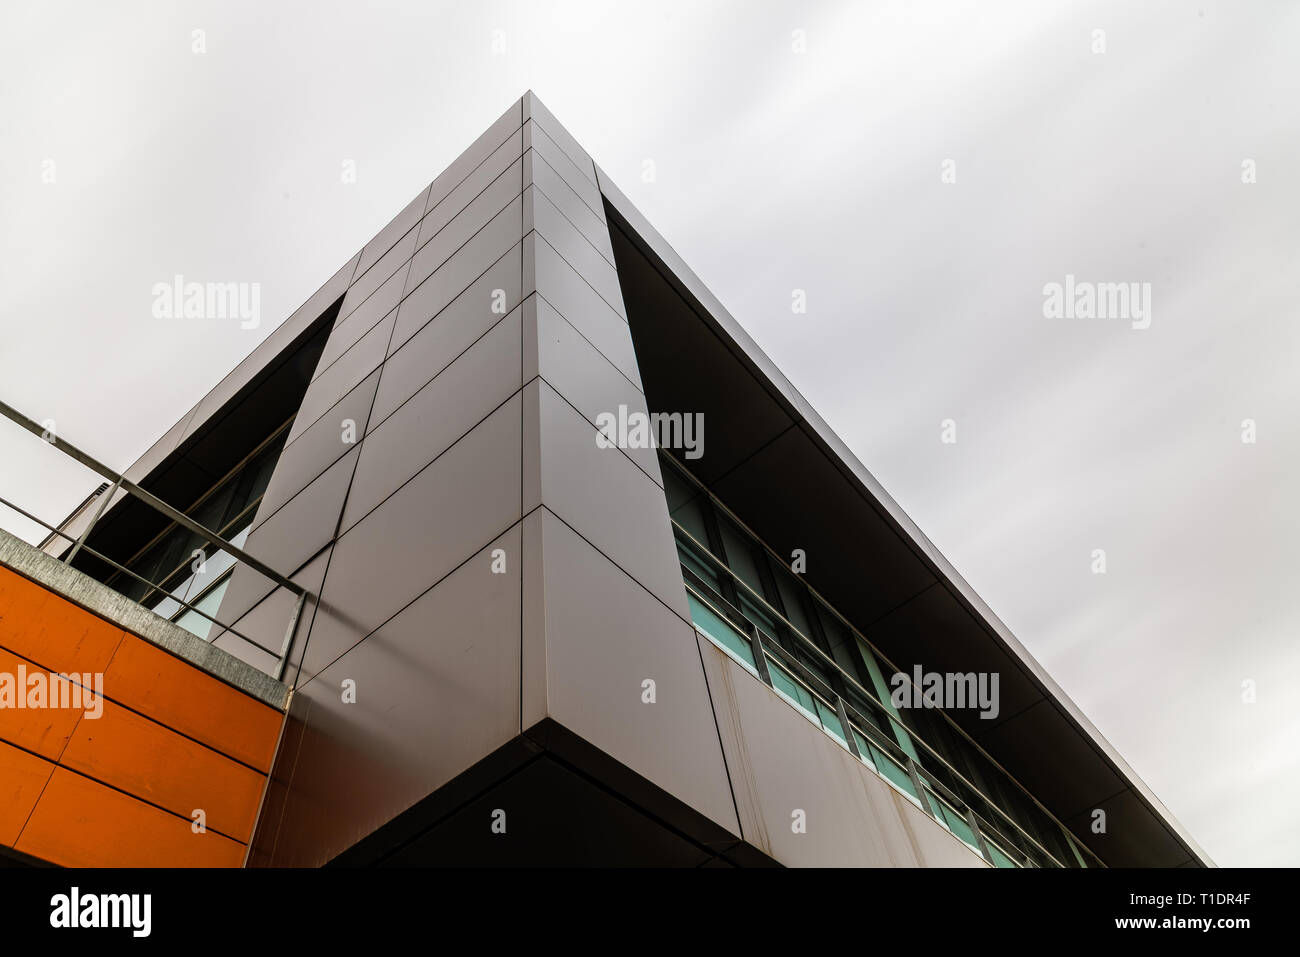 Modern architecture office building with ventilated facade. Exterior view against sky with copyspace, long exposure Stock Photo